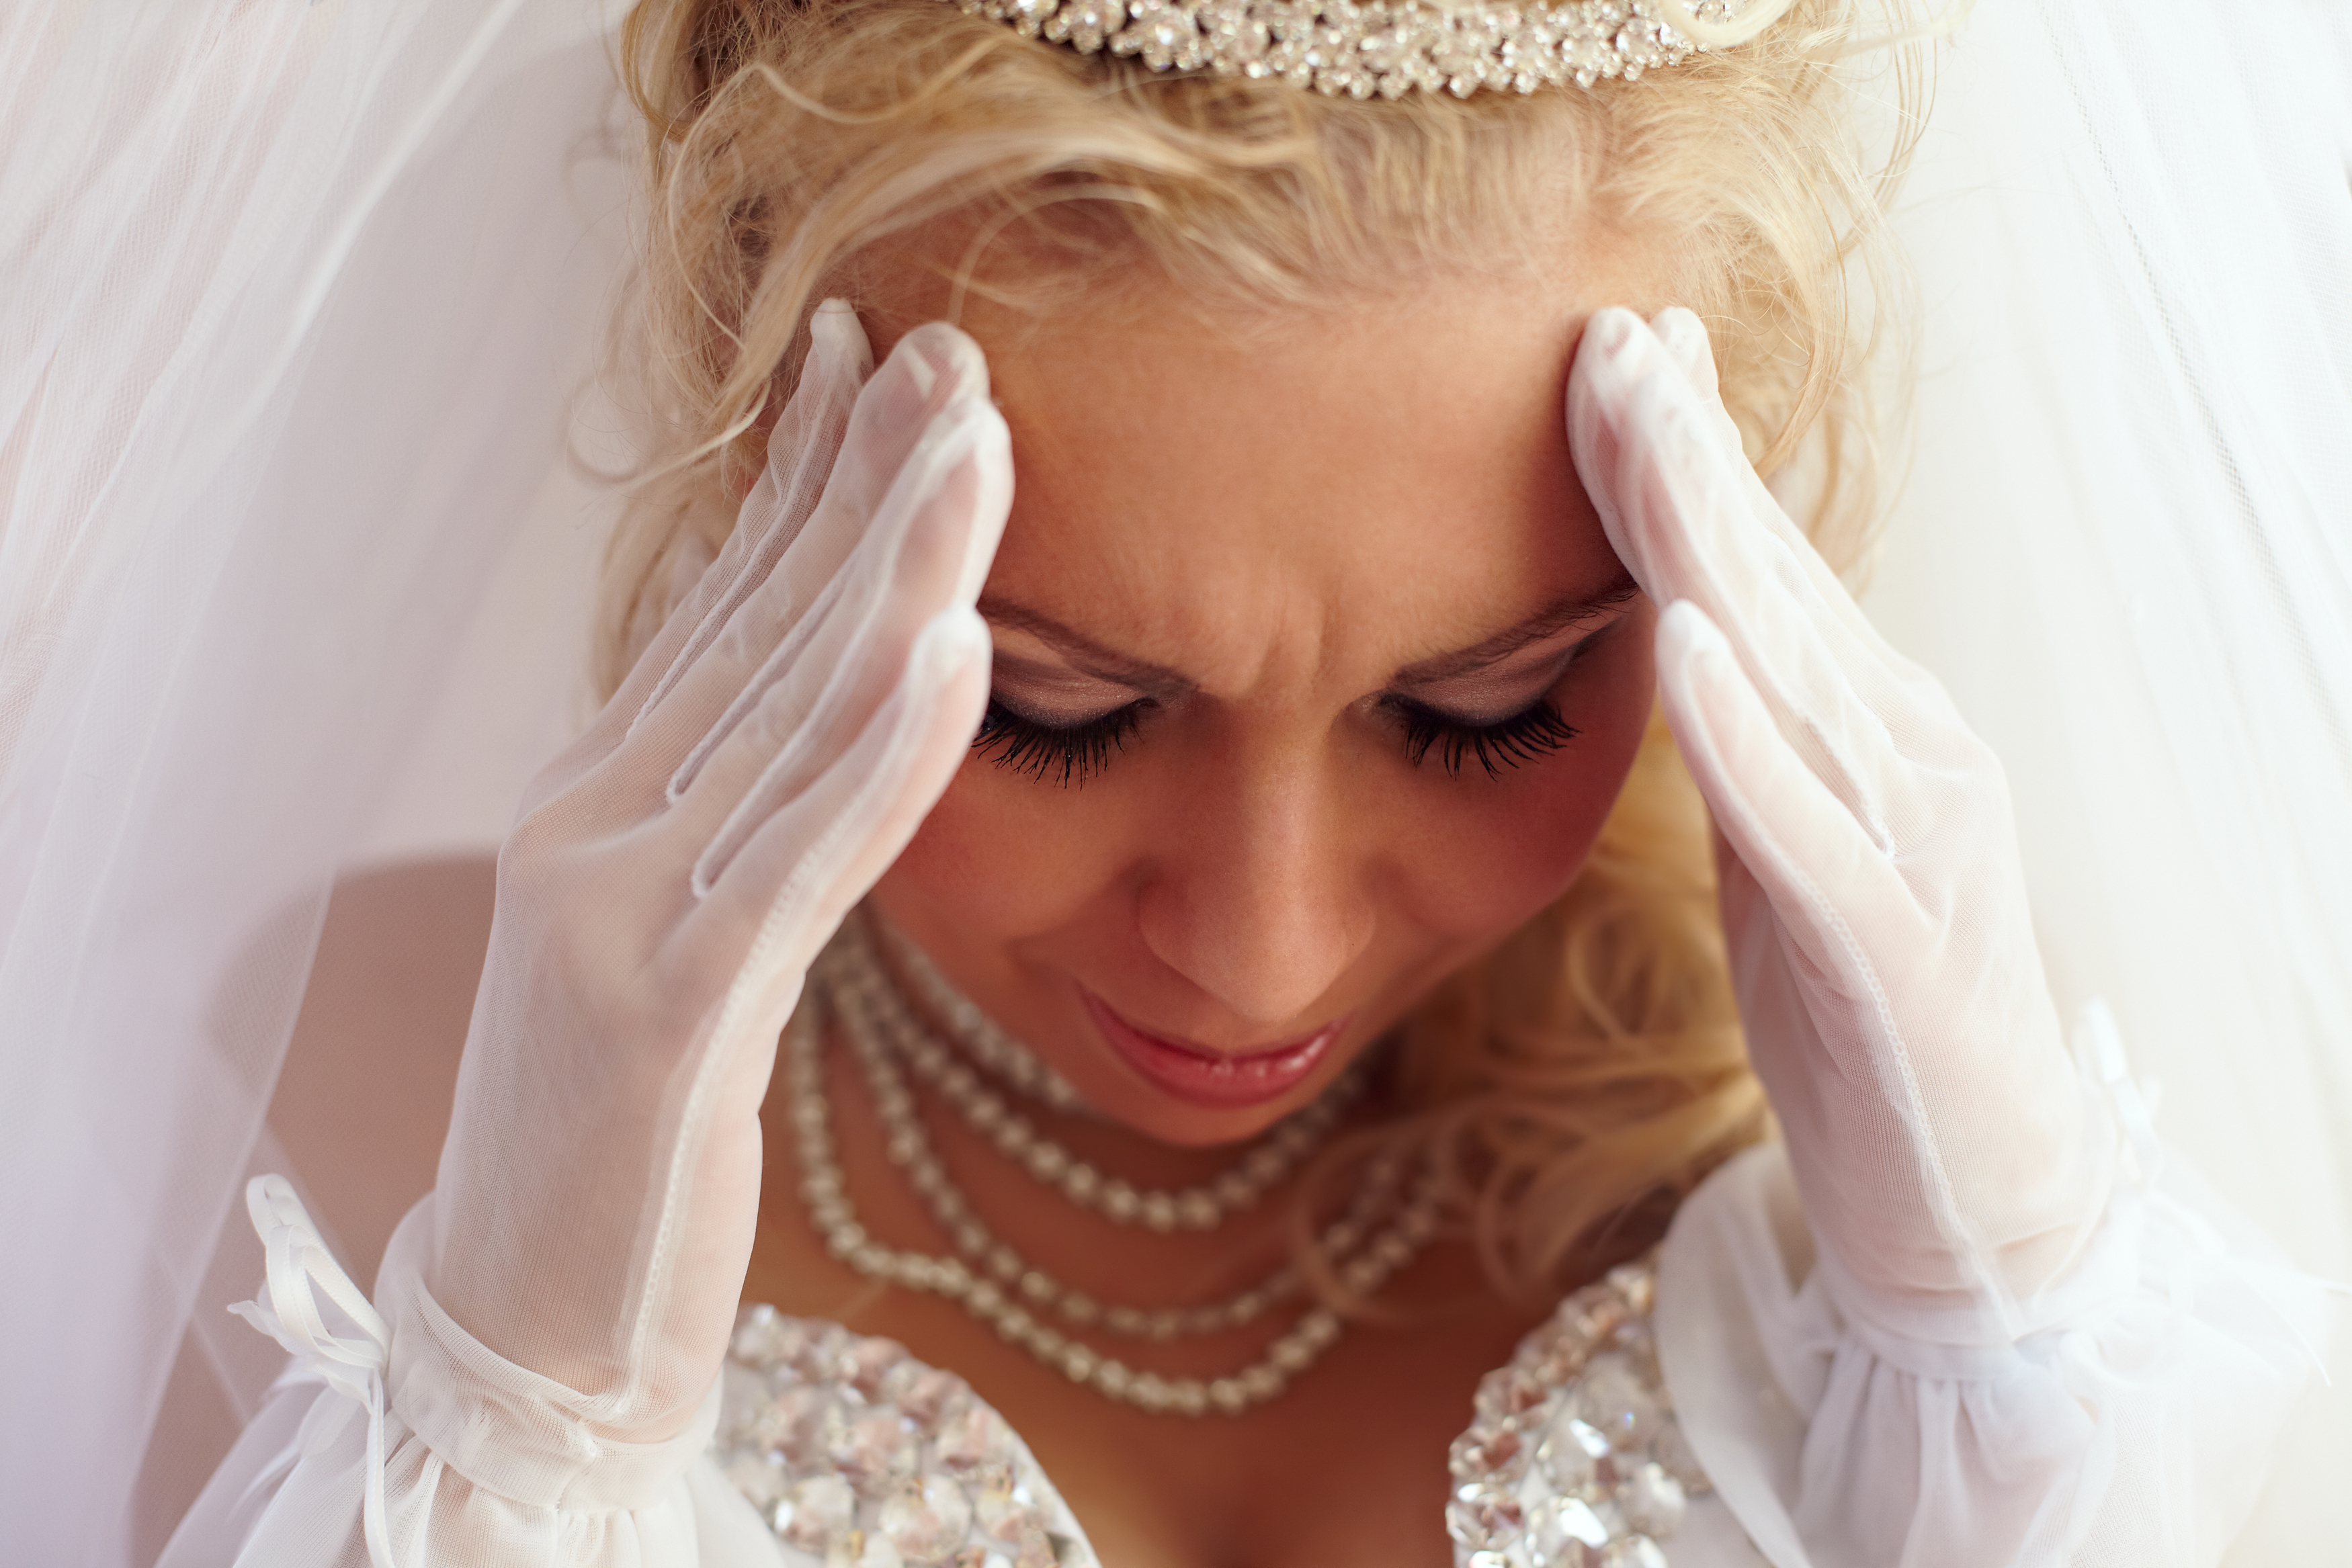 A stressed out bride | Source: Shutterstock